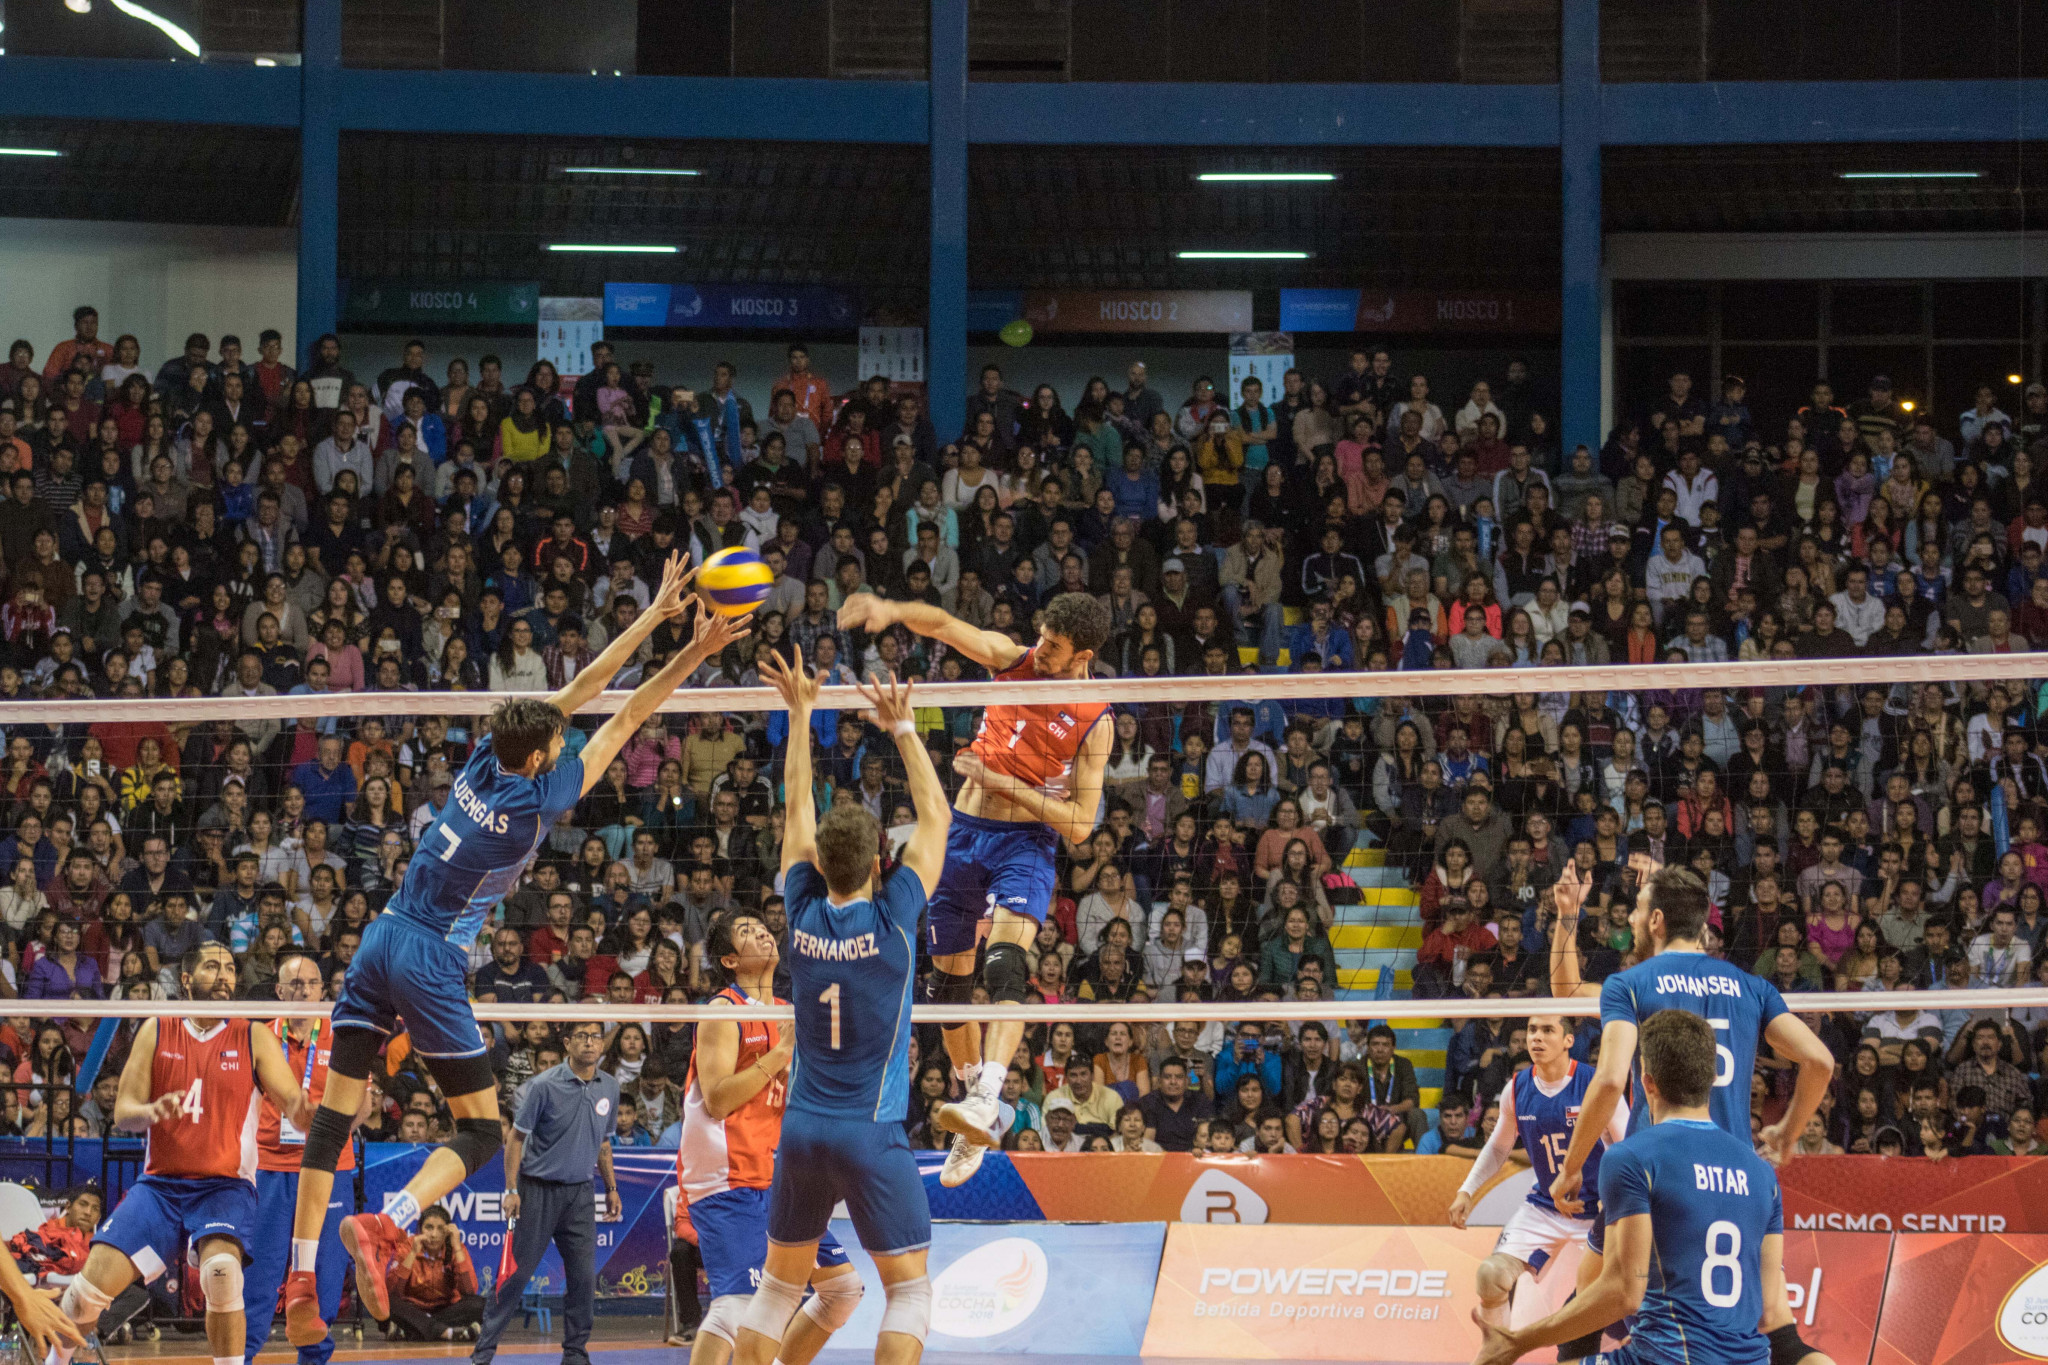 Argentina beat Chile to men's volleyball crown at 2018 South American Games